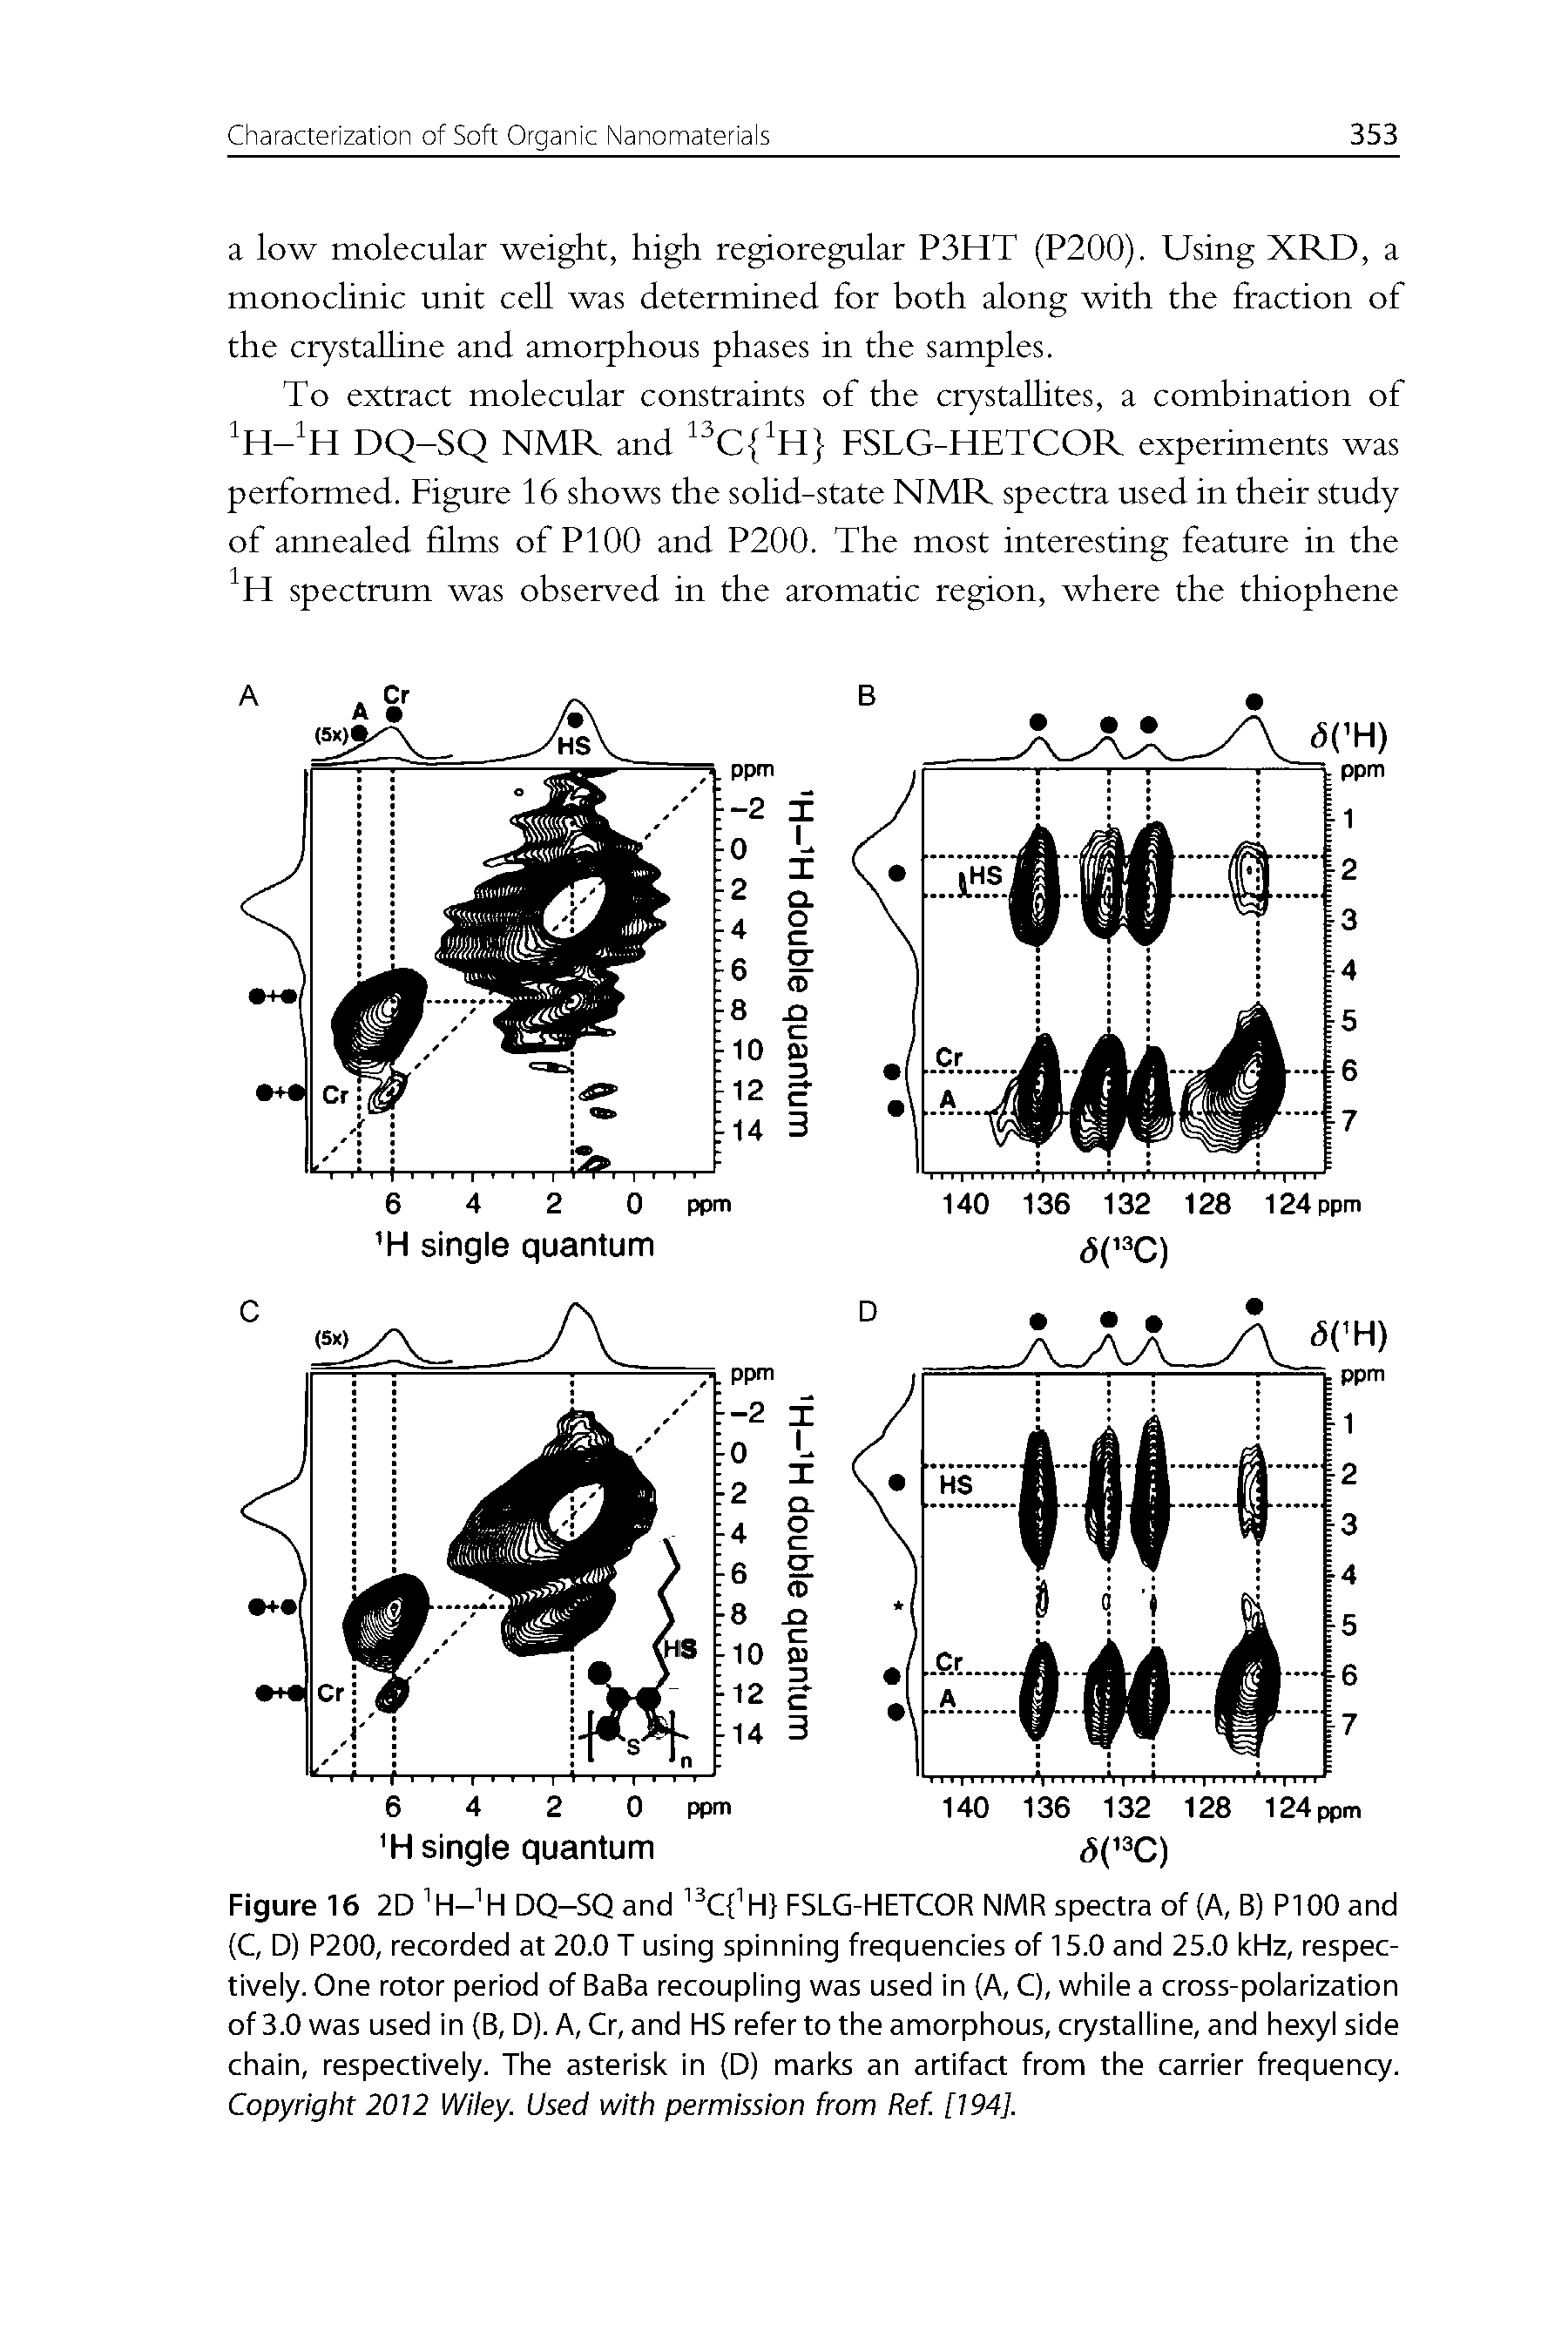 Figure 16 2D H- H DQ-SQ and C H FSLG-HETCOR NMR spectra of (A, B) PlOO and (C, D) P200, recorded at 20.0 T using spinning frequencies of 15.0 and 25.0 kHz, respectively. One rotor period of BaBa recoupling was used in (A, C), while a cross-polarization of 3.0 was used in (B, D). A, Cr, and HS refer to the amorphous, crystalline, and hexyl side chain, respectively. The asterisk in (D) marks an artifact from the carrier frequency. Copyright 2012 Wiley. Used with permission from Ref [194],...